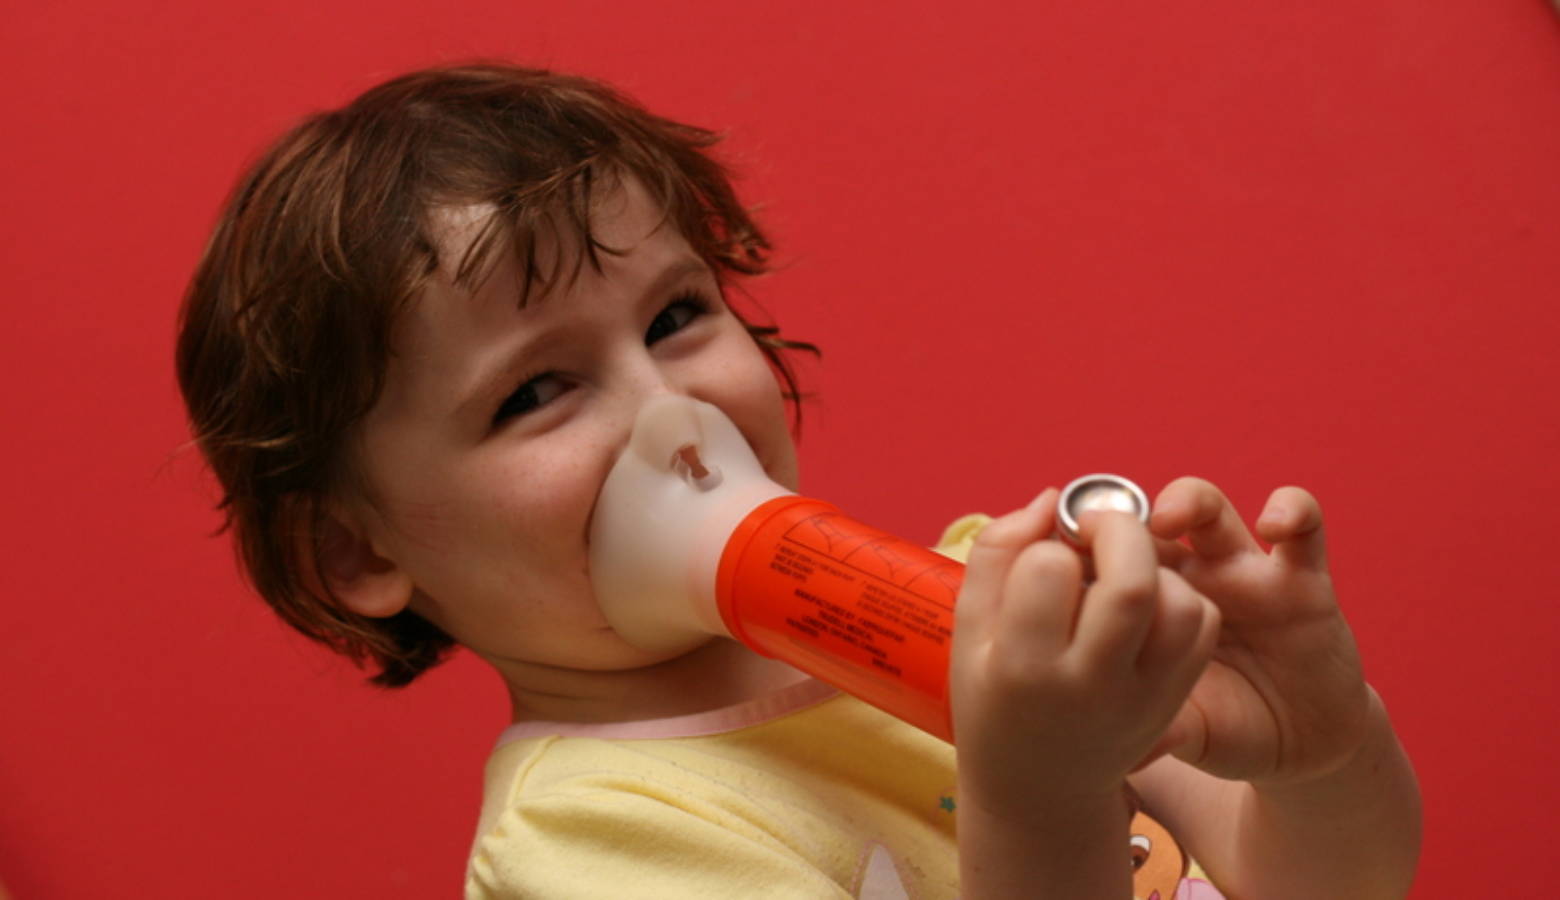 A child uses a spacer with an inhaler to treat asthma symptoms. Rising temperatures make the ozone and particle pollution that contribute to asthma problems worse (Wikimedia Commons)